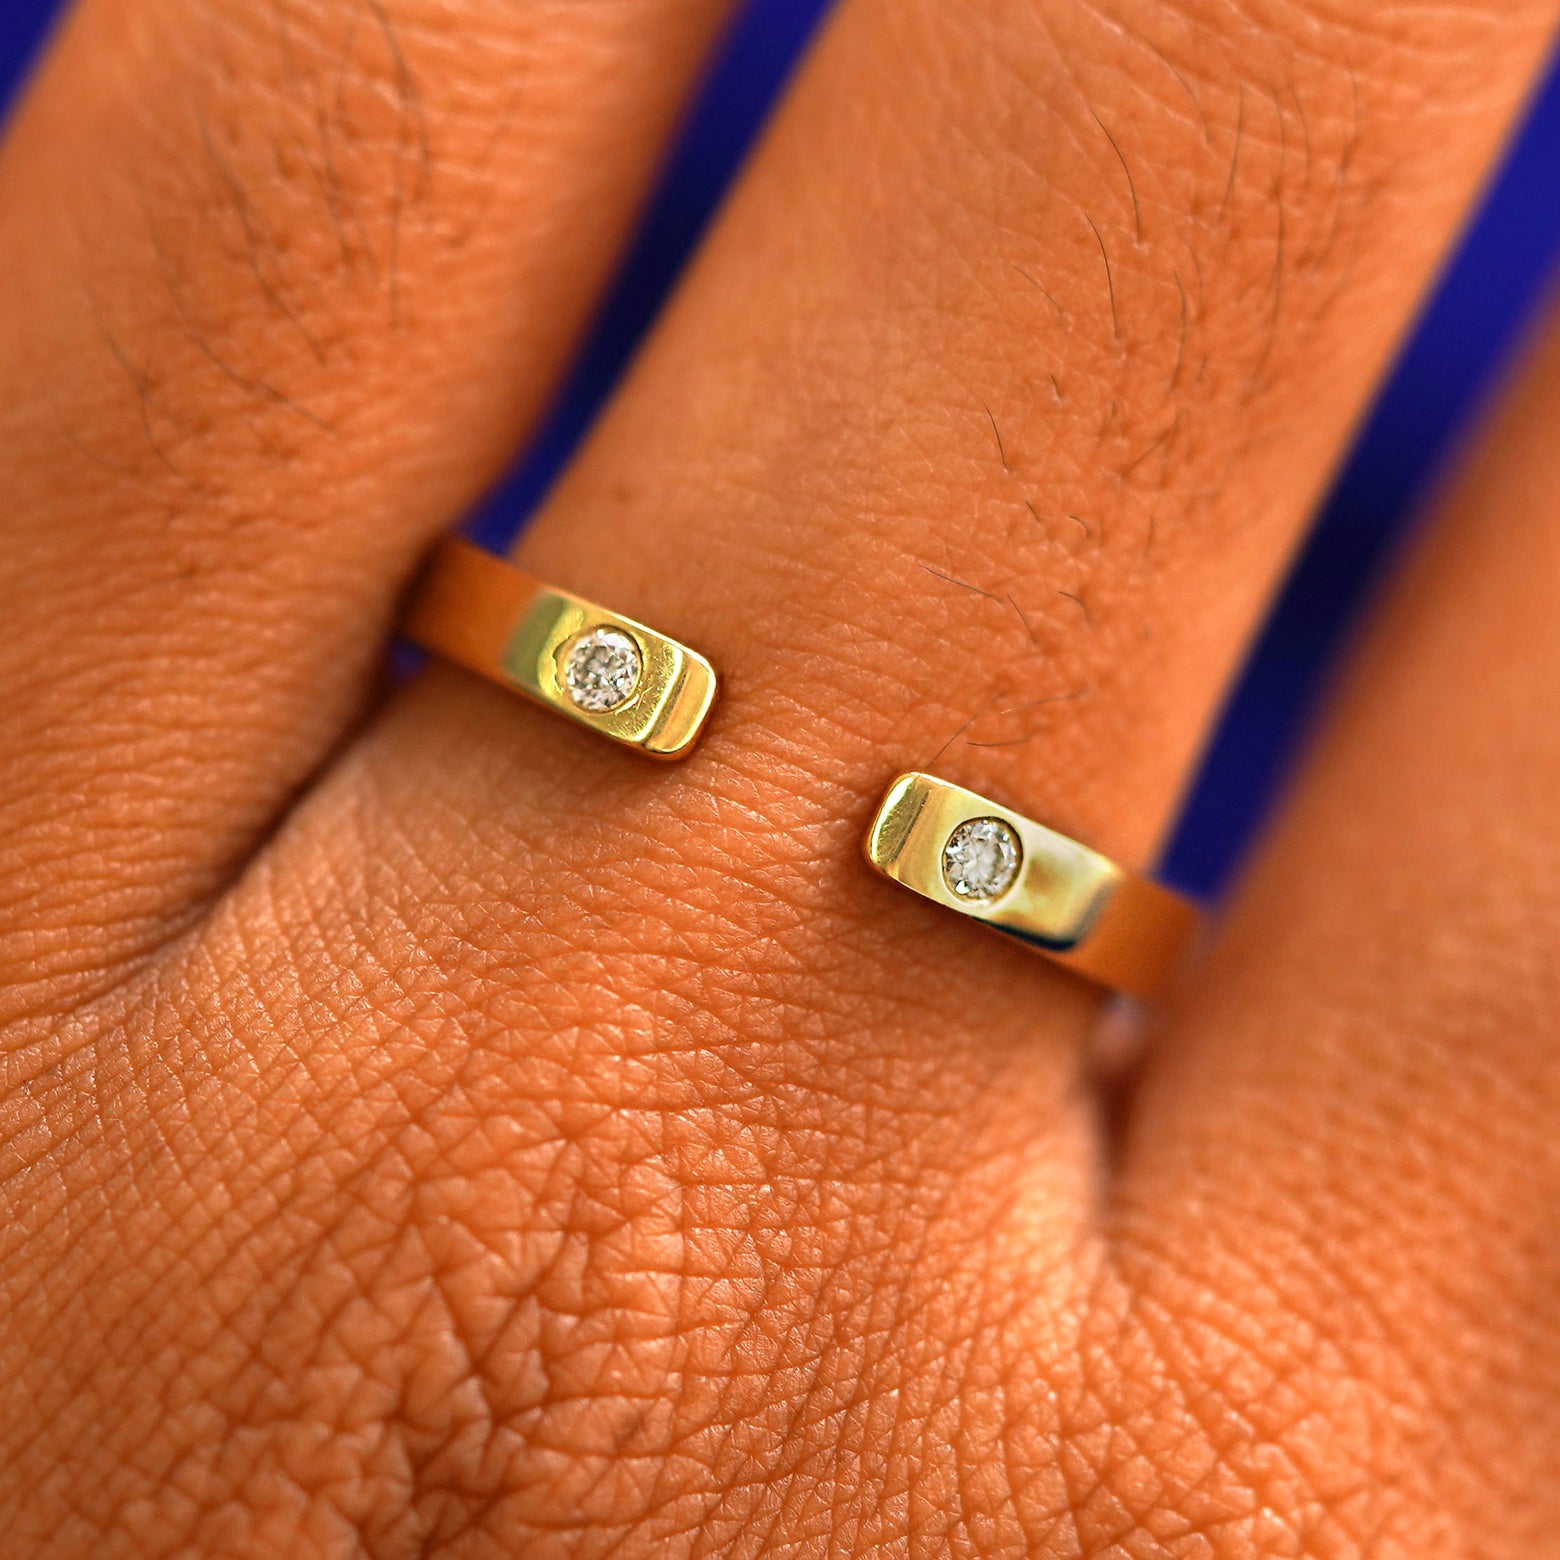 Close up view of a model's fingers wearing a 14k yellow gold Open Industrial Band